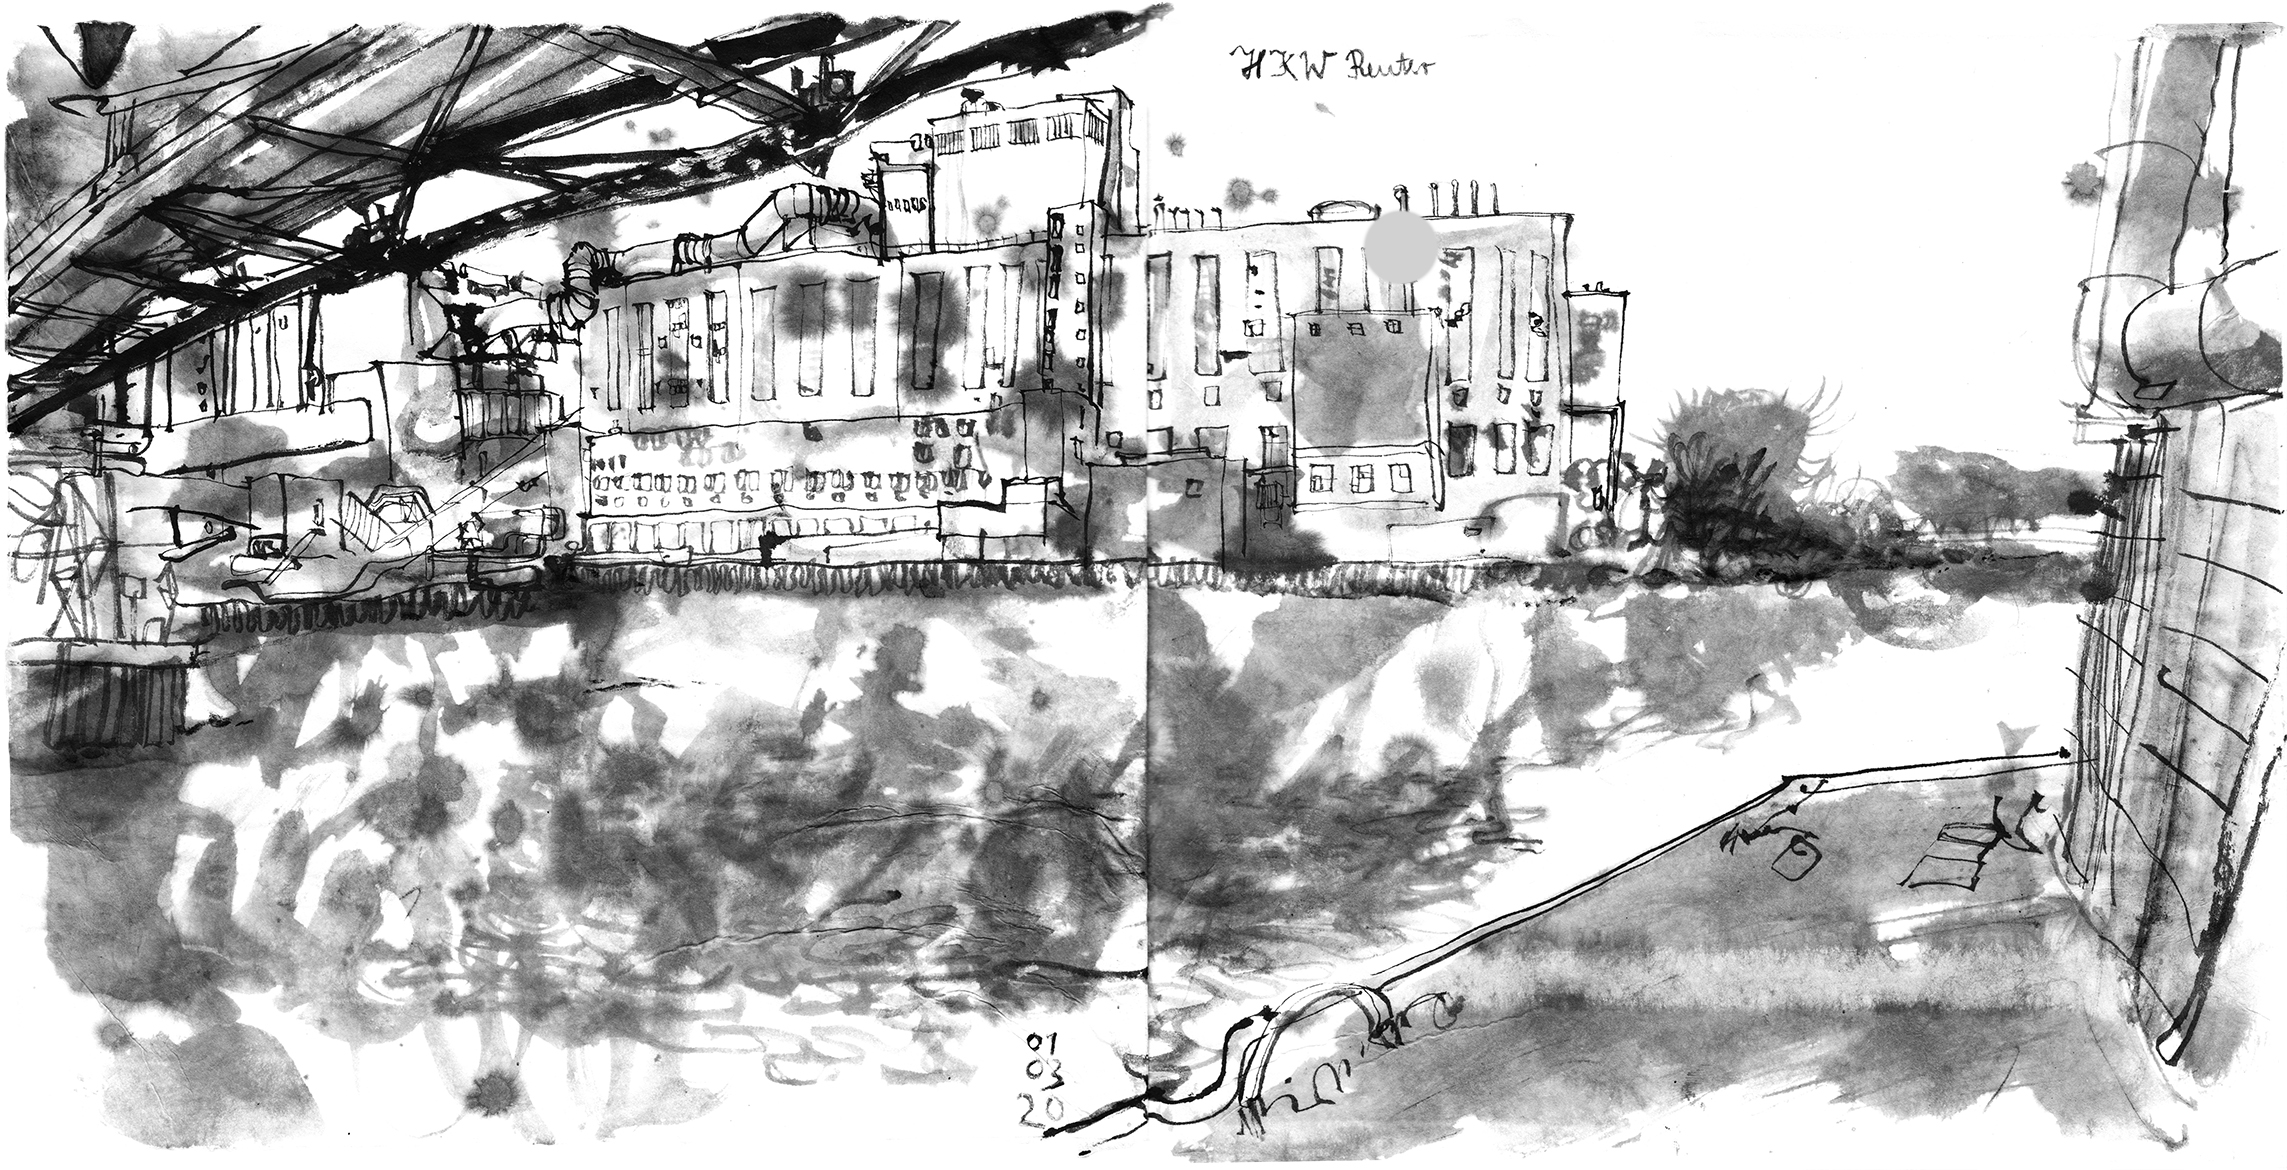 Ink drawing of an abondend power plant at the riverside, seen from underneath a bridge.